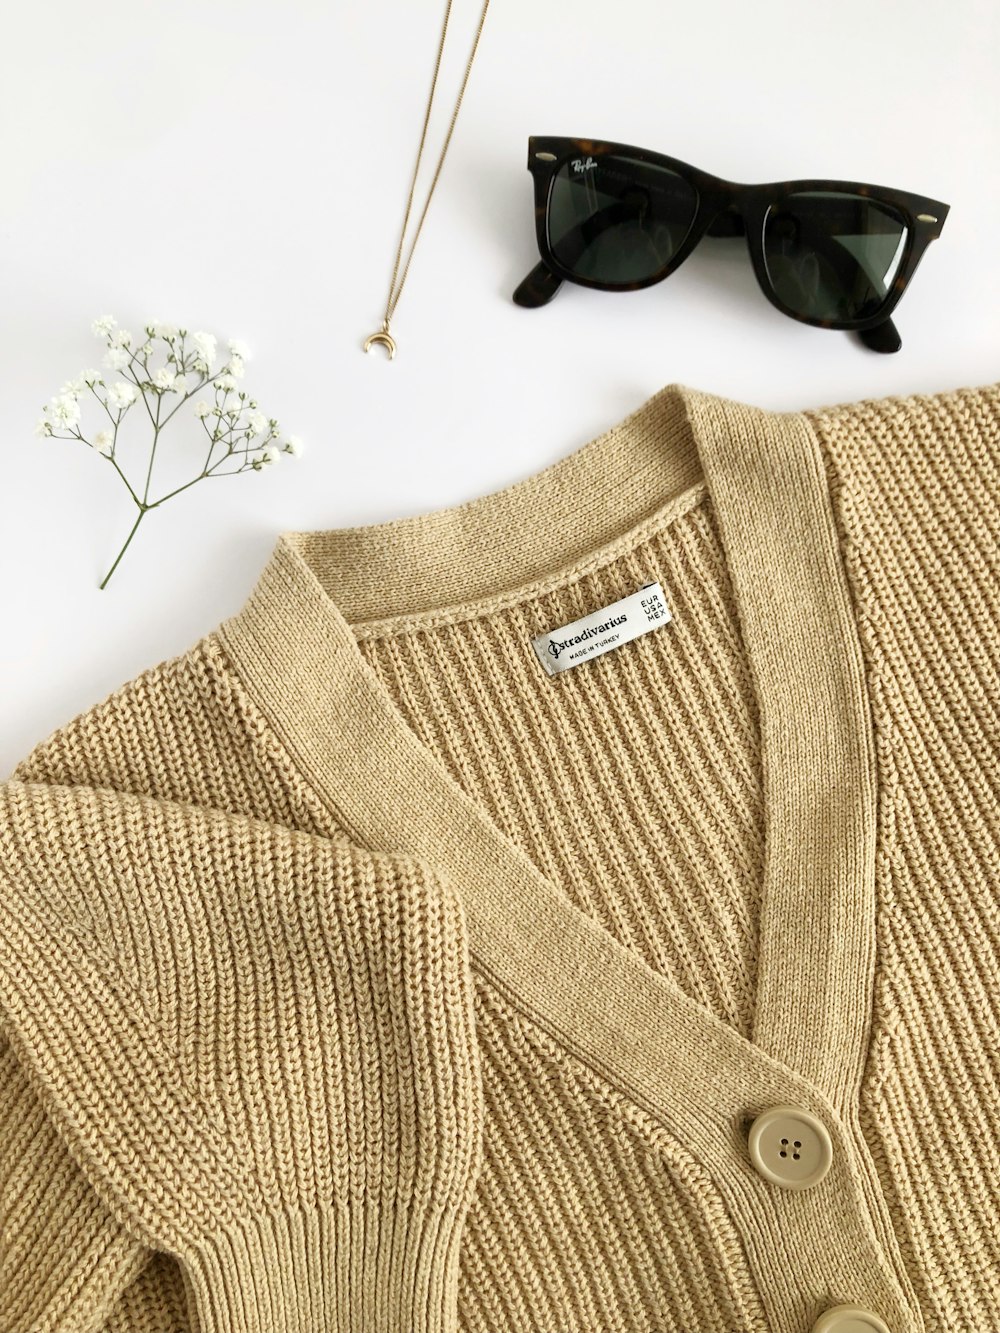 a pair of sunglasses and a sweater on a white surface